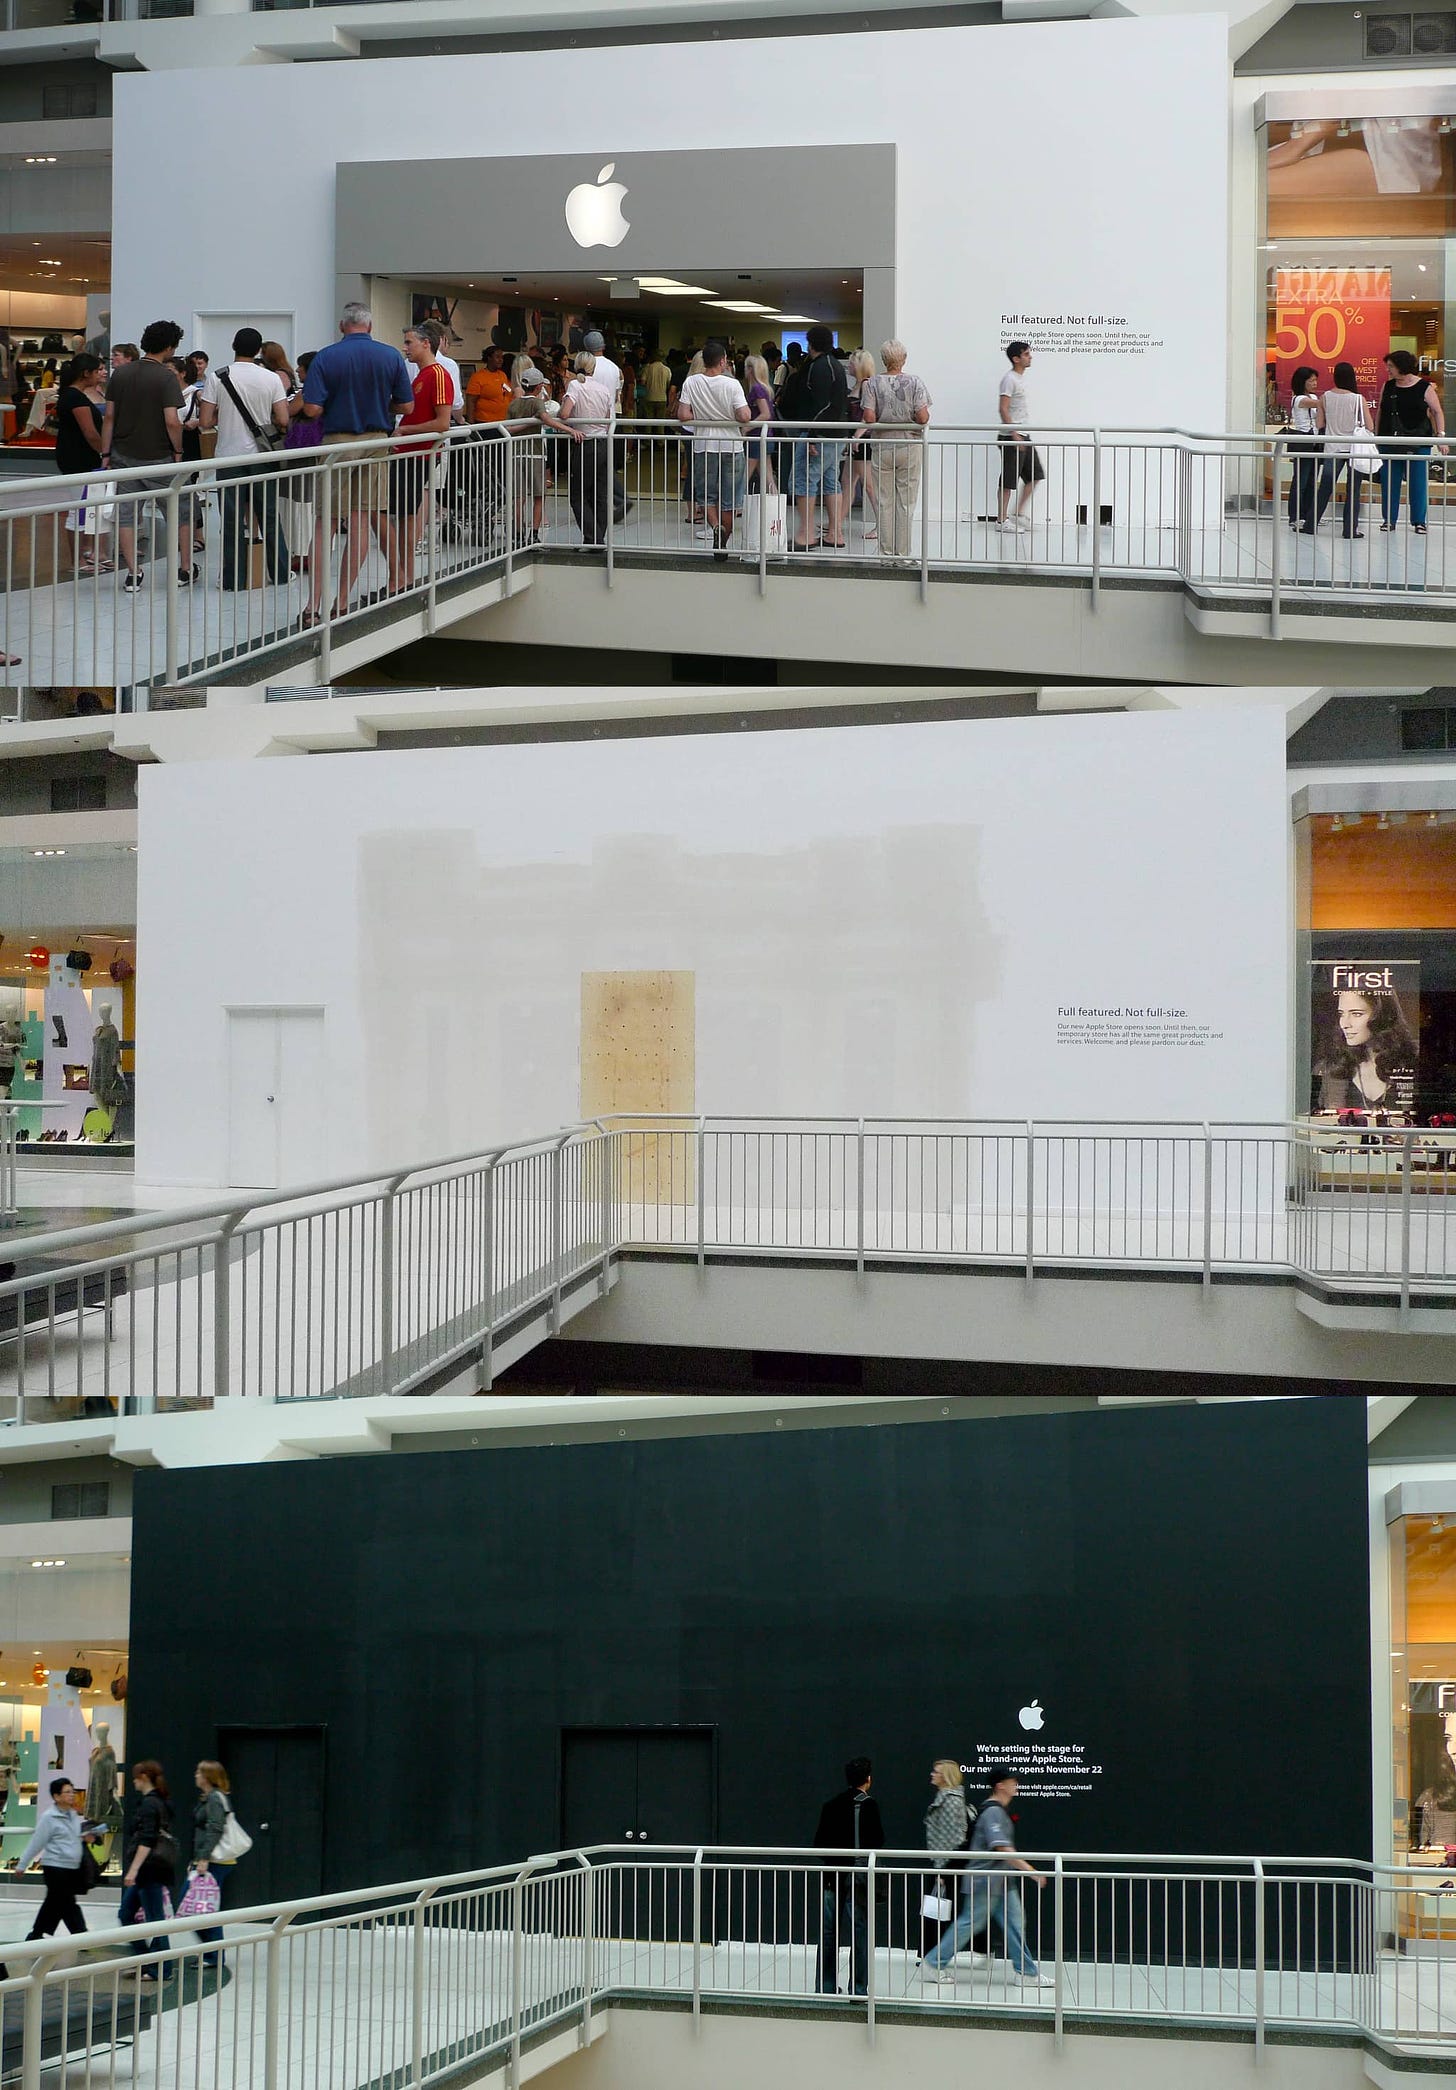 Three images depict the Apple Eaton Centre temporary store during operation, after closure, and before the grand reopening of the store.